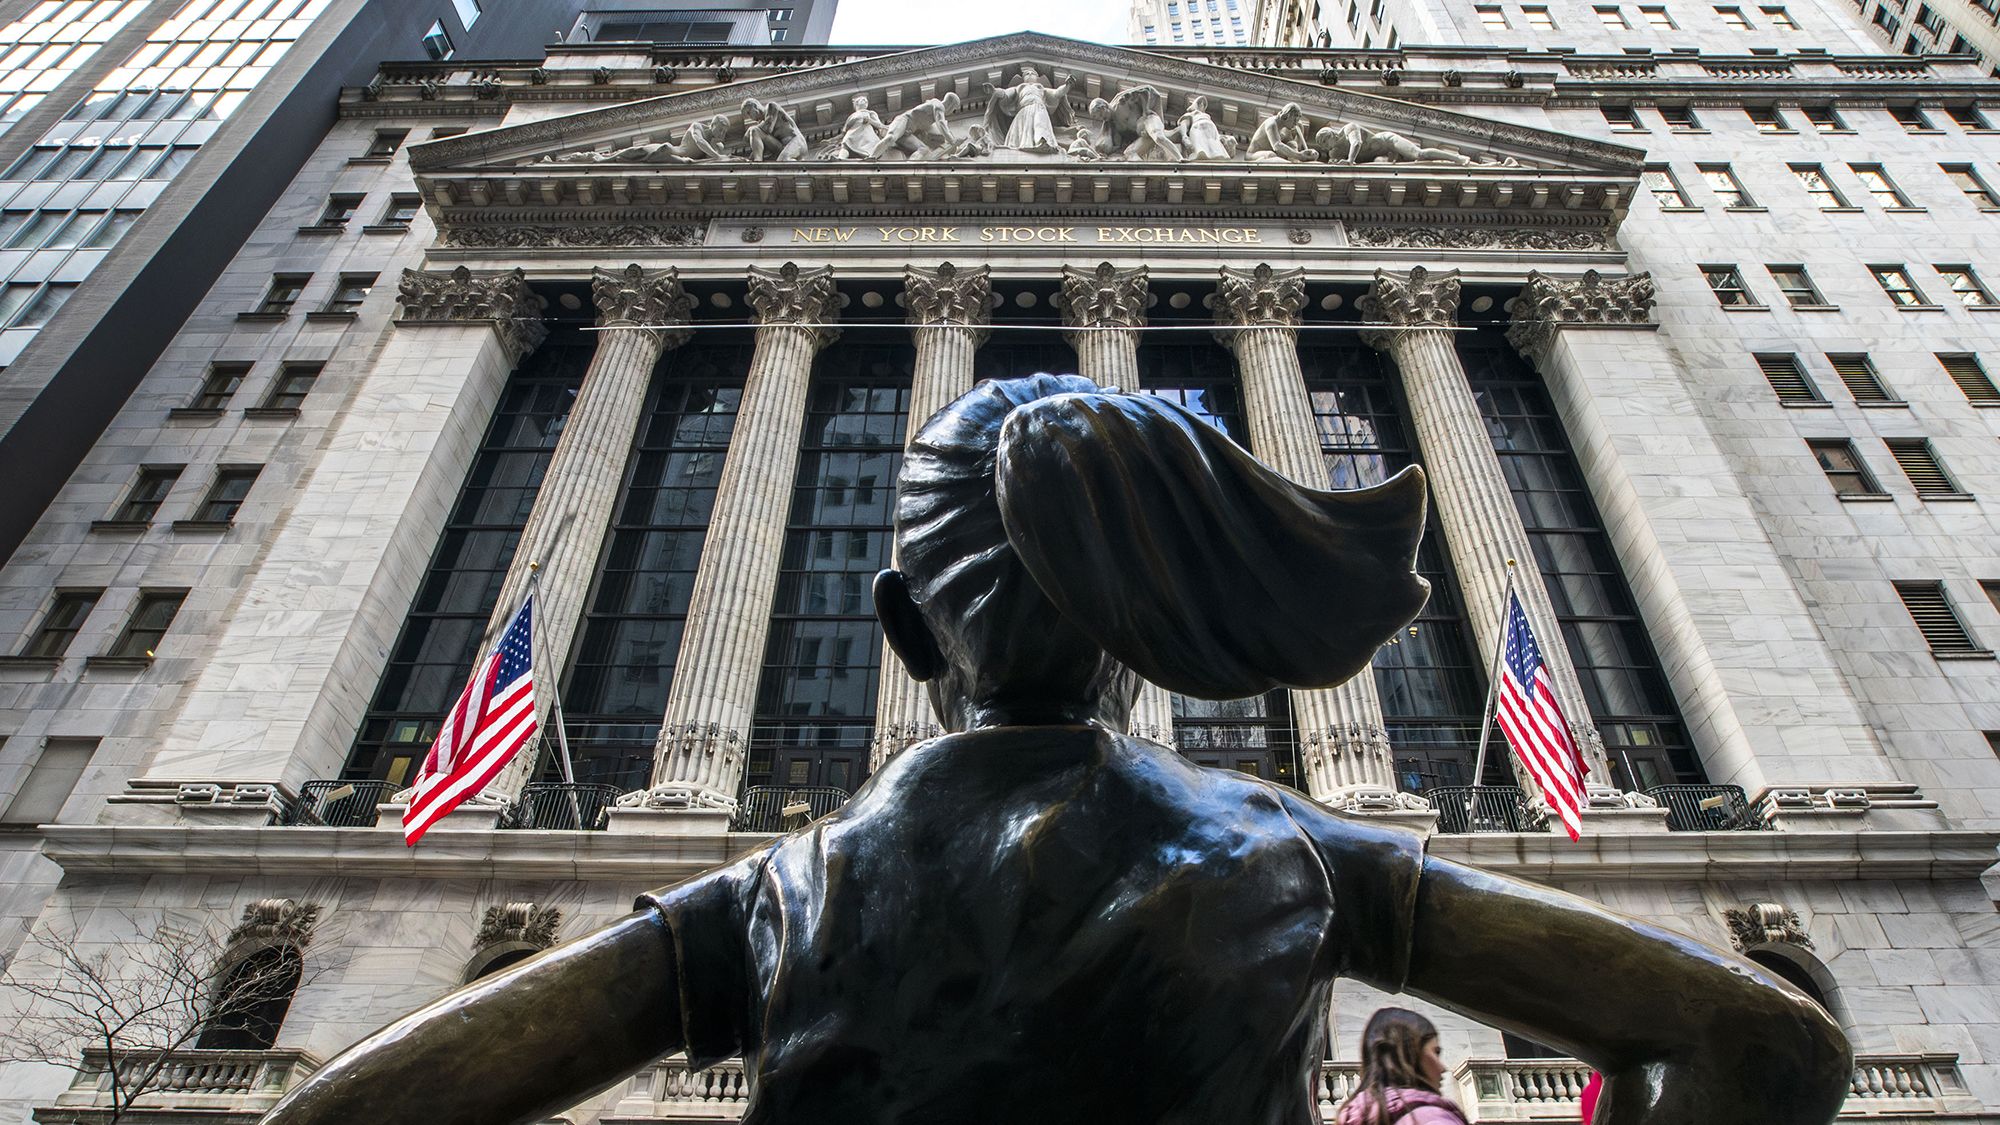 While passing the 40,000 level doesn’t hold much practical value for investors, it can propel optimistic sentiment on Wall Street.